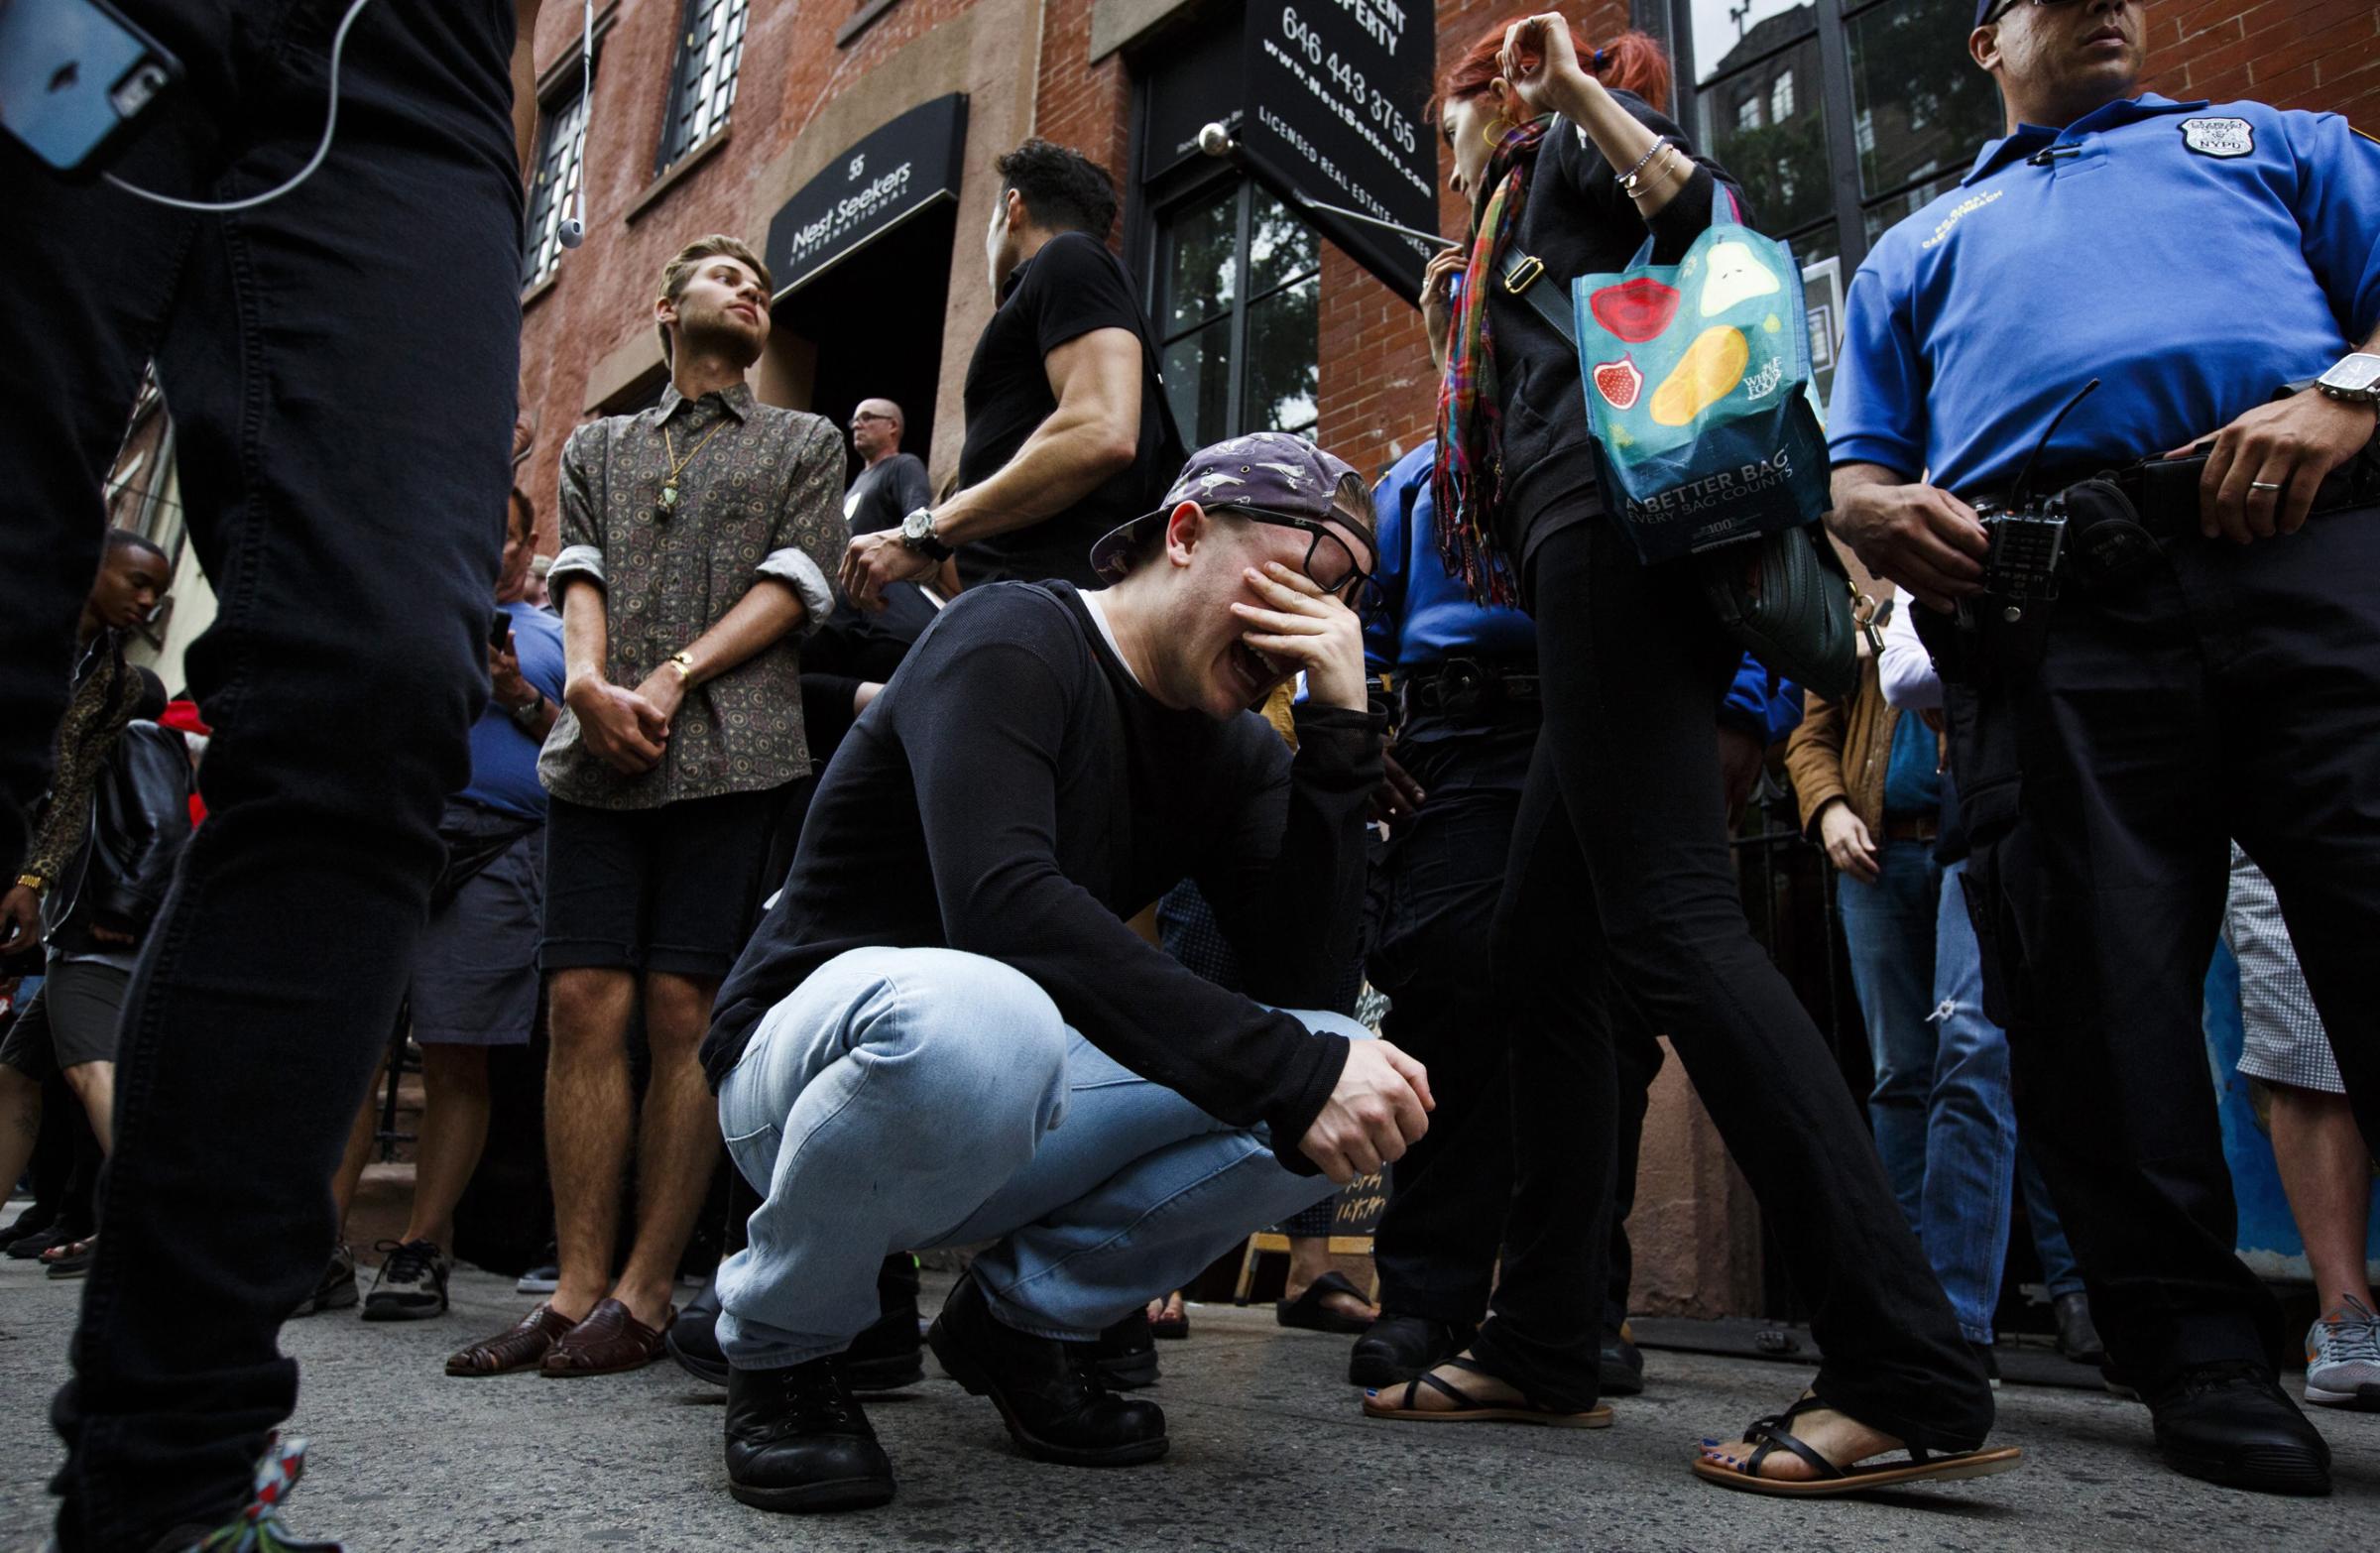 Taylor Forrest (C), of Orlando, Florida, cries on the sidewalk near a memorial for the victims of a mass shooting at a gay club in Orlando outside of the Stonewall Inn, a famous gay bar, in New York City on June 13, 2016.